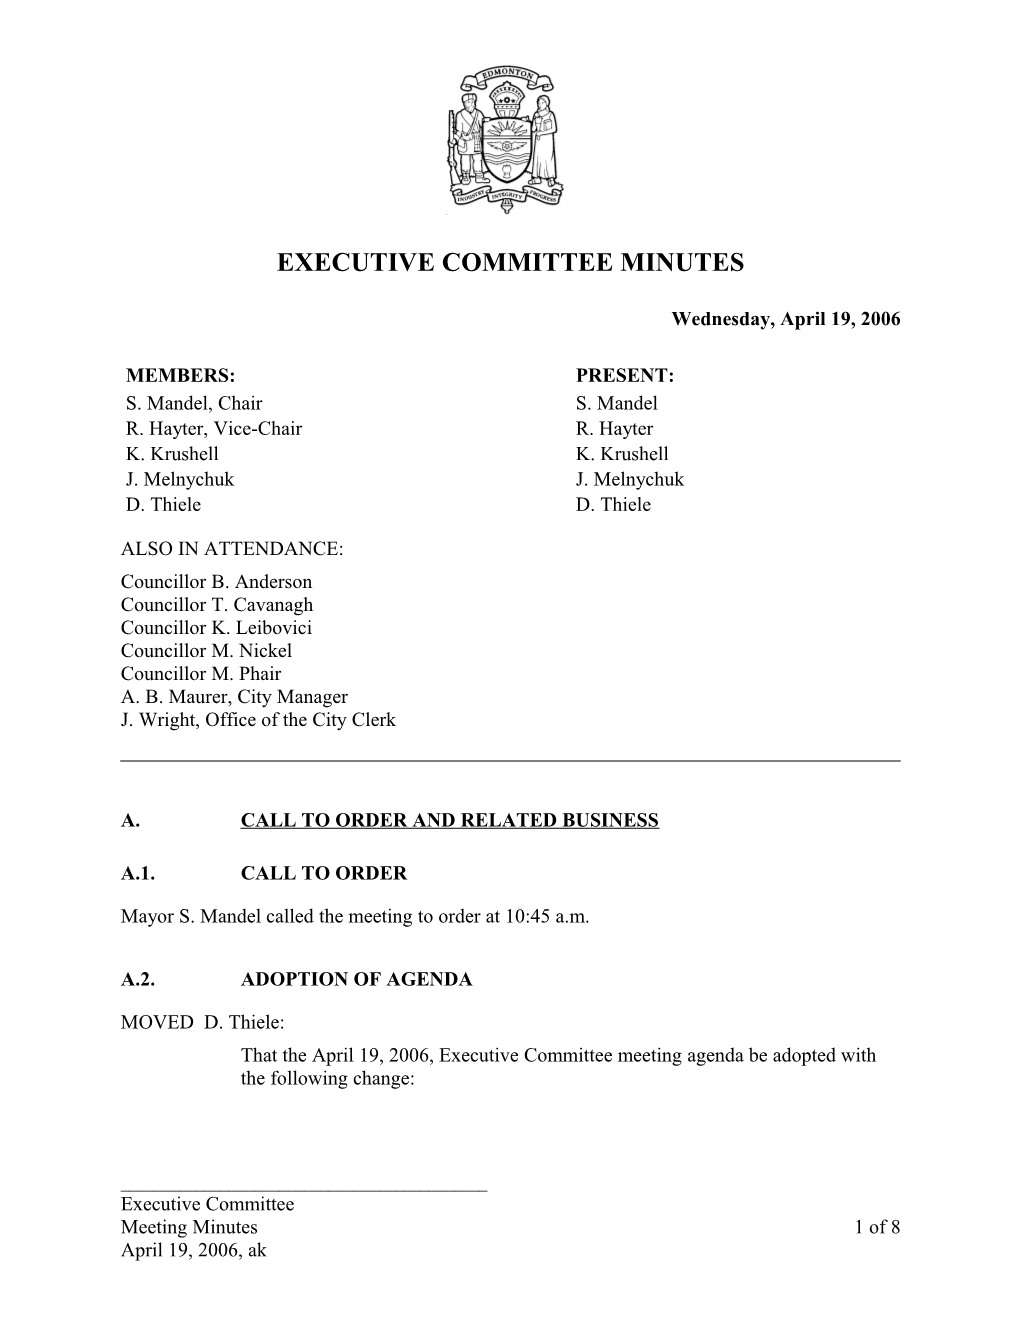 Minutes for Executive Committee April 19, 2006 Meeting